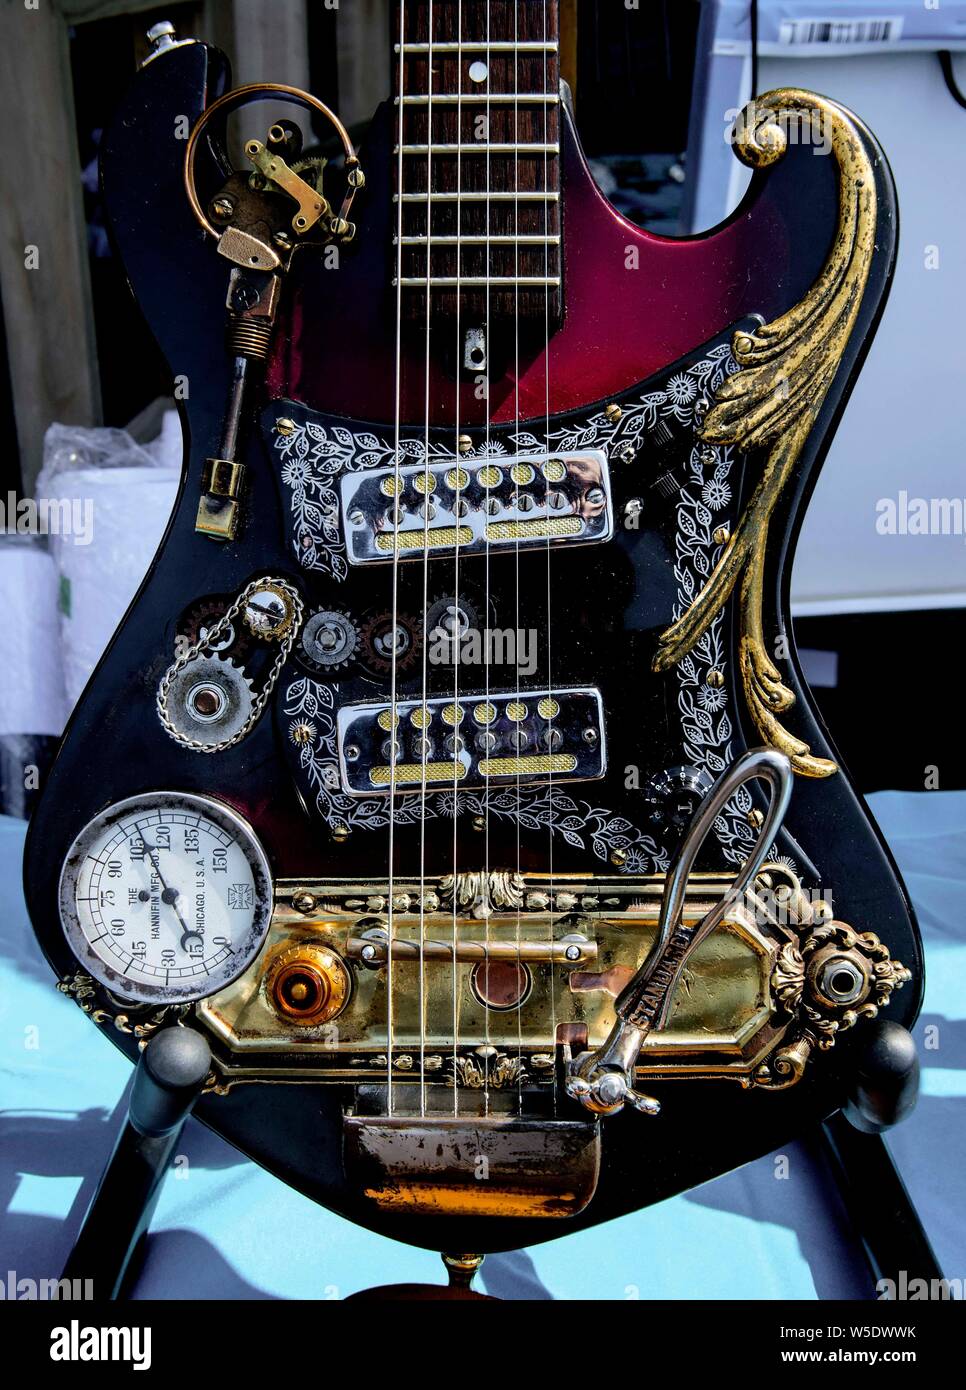 Dearborn, Michigan, USA. 28th July, 2019. Detail of a guitar by Steampunk  Fabricators on display during the 10th Annual Maker Faire Detroit at the  Henry Ford Museum of American Innovation. Maker Faire